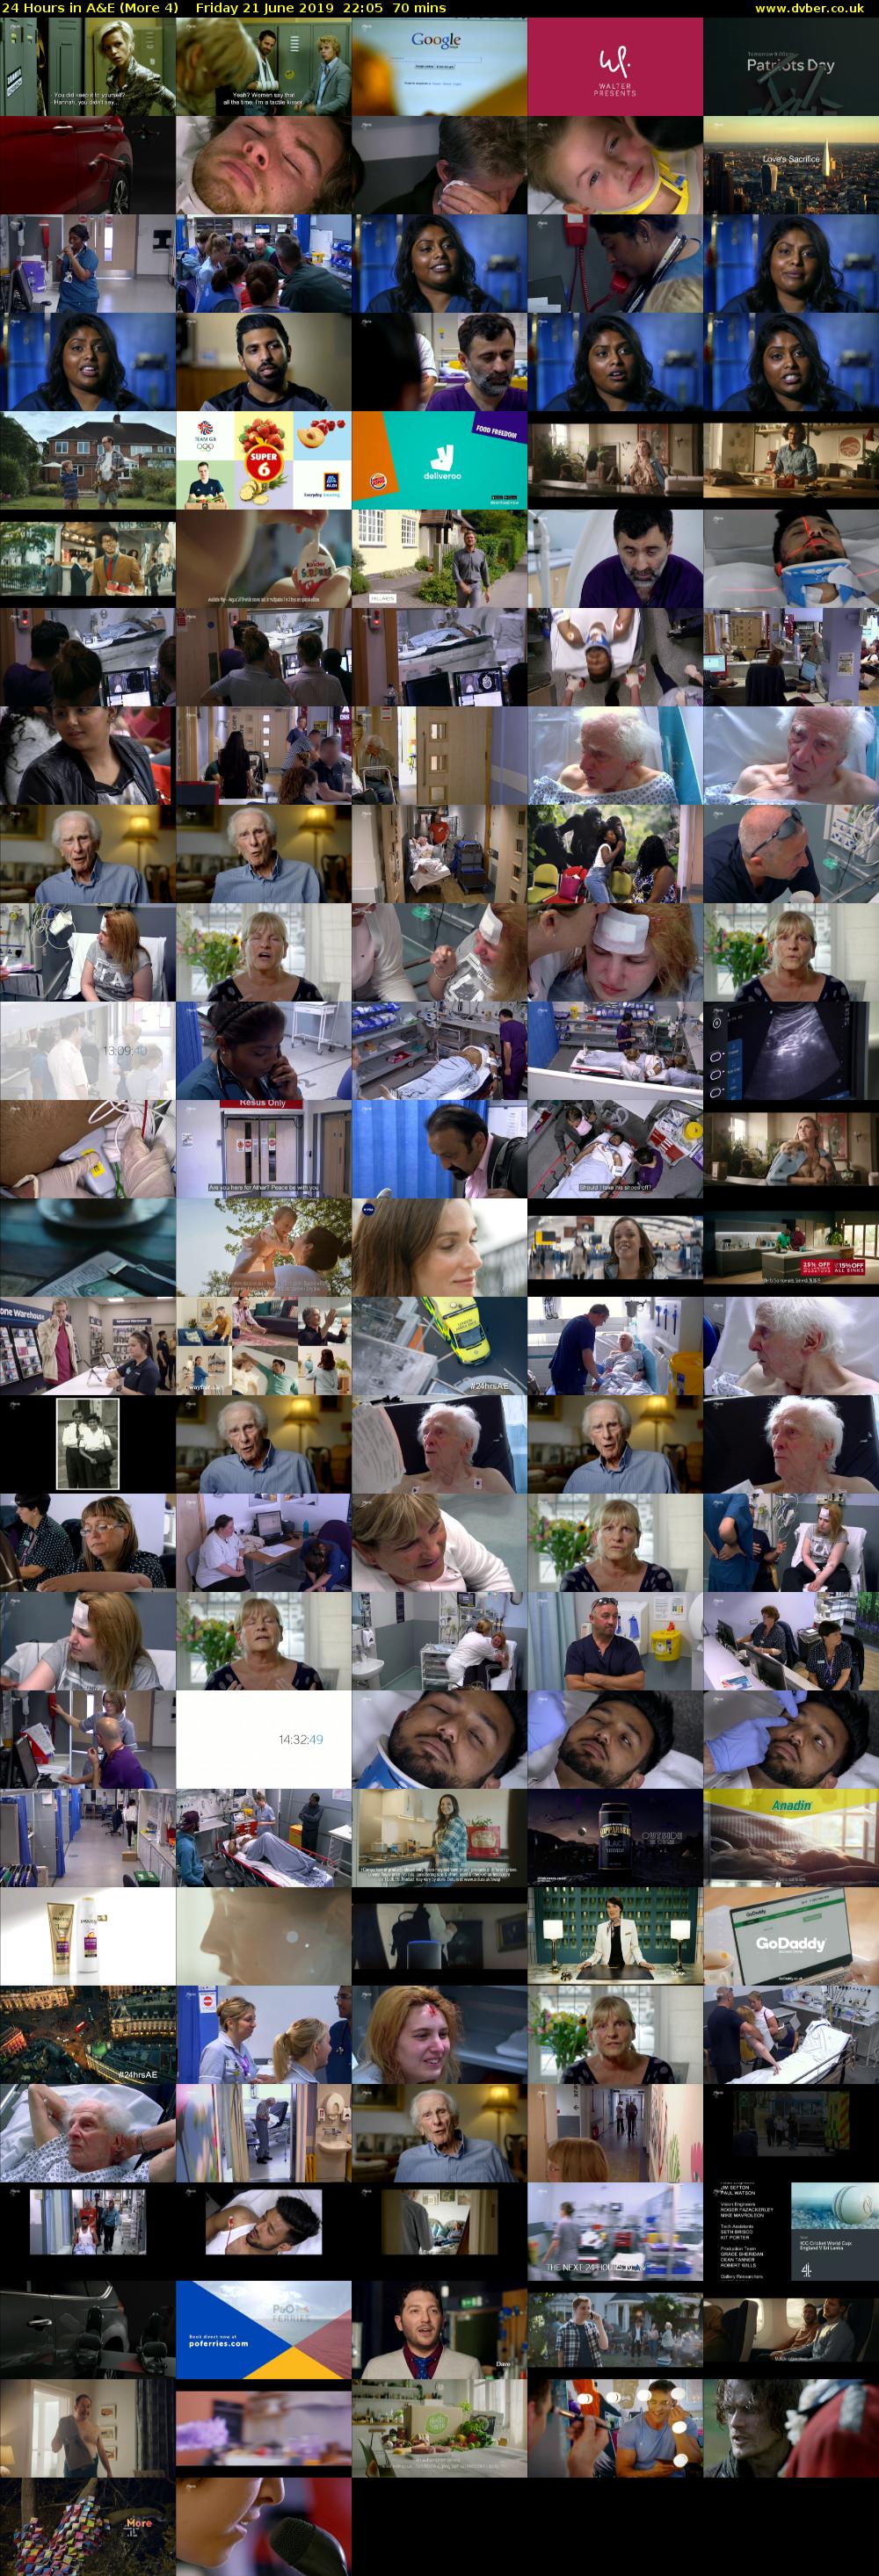 24 Hours in A&E (More 4) Friday 21 June 2019 22:05 - 23:15